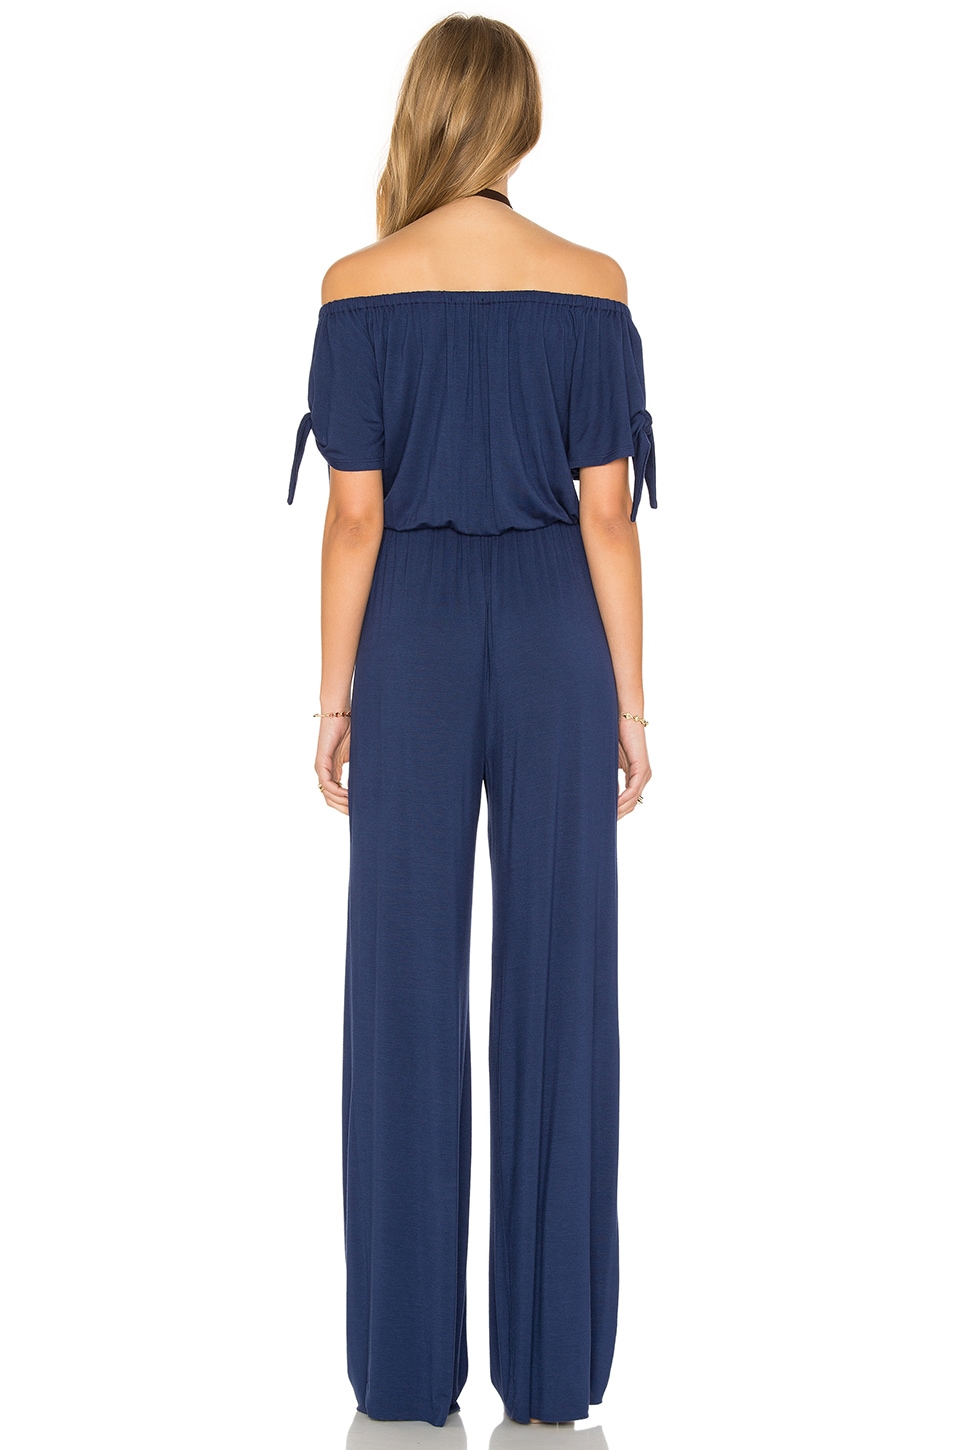 Clayton Daliah Off The Shoulder Jumpsuit in Navy | REVOLVE